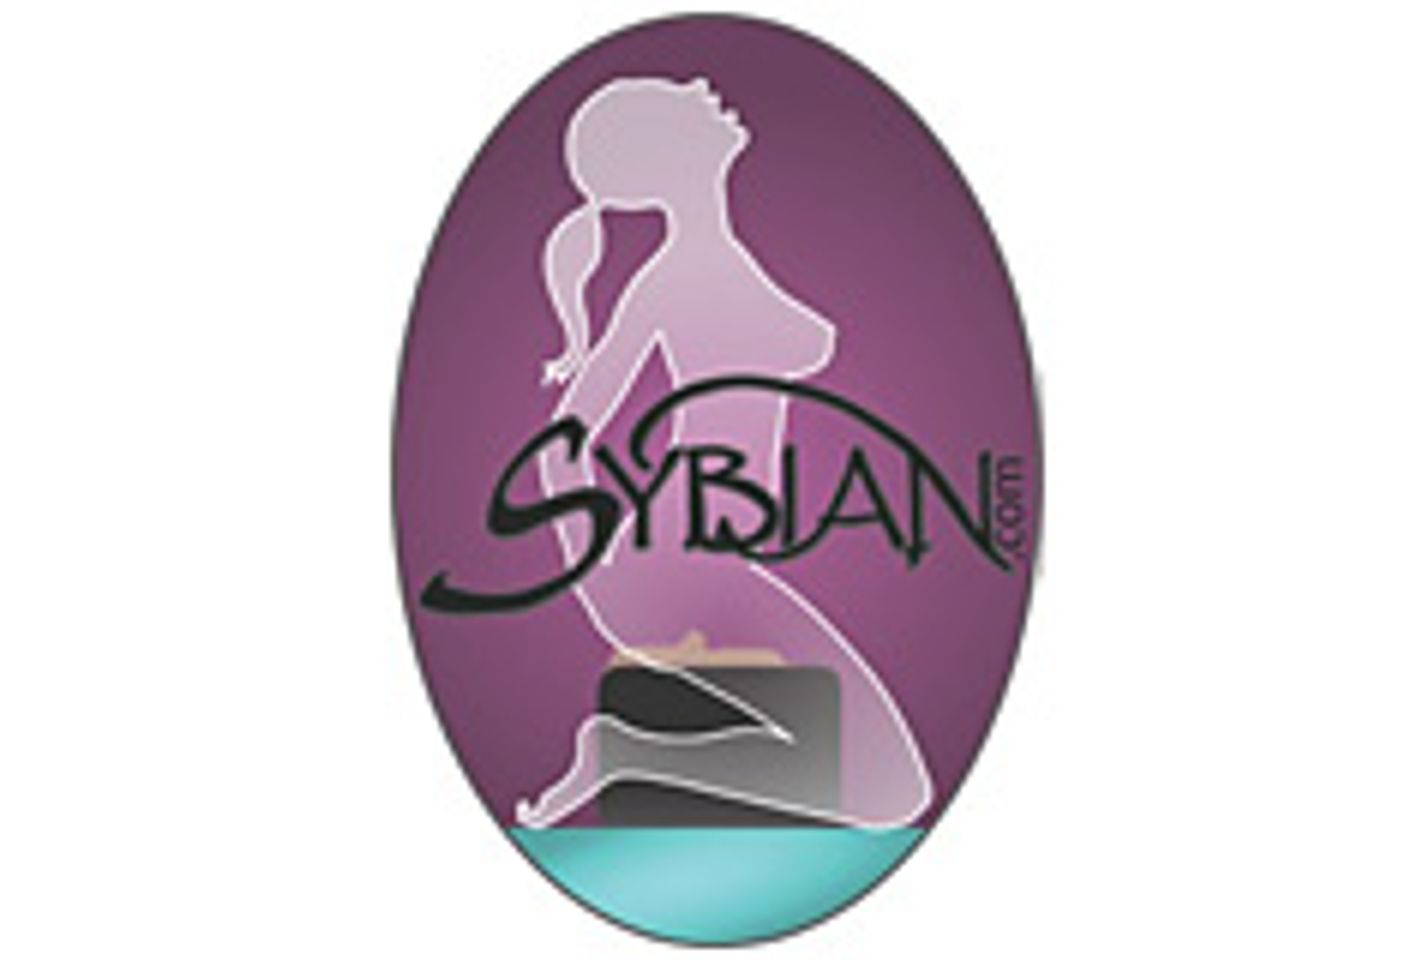 Sybian Offering Limited Edition Holiday Sugar Plum Version